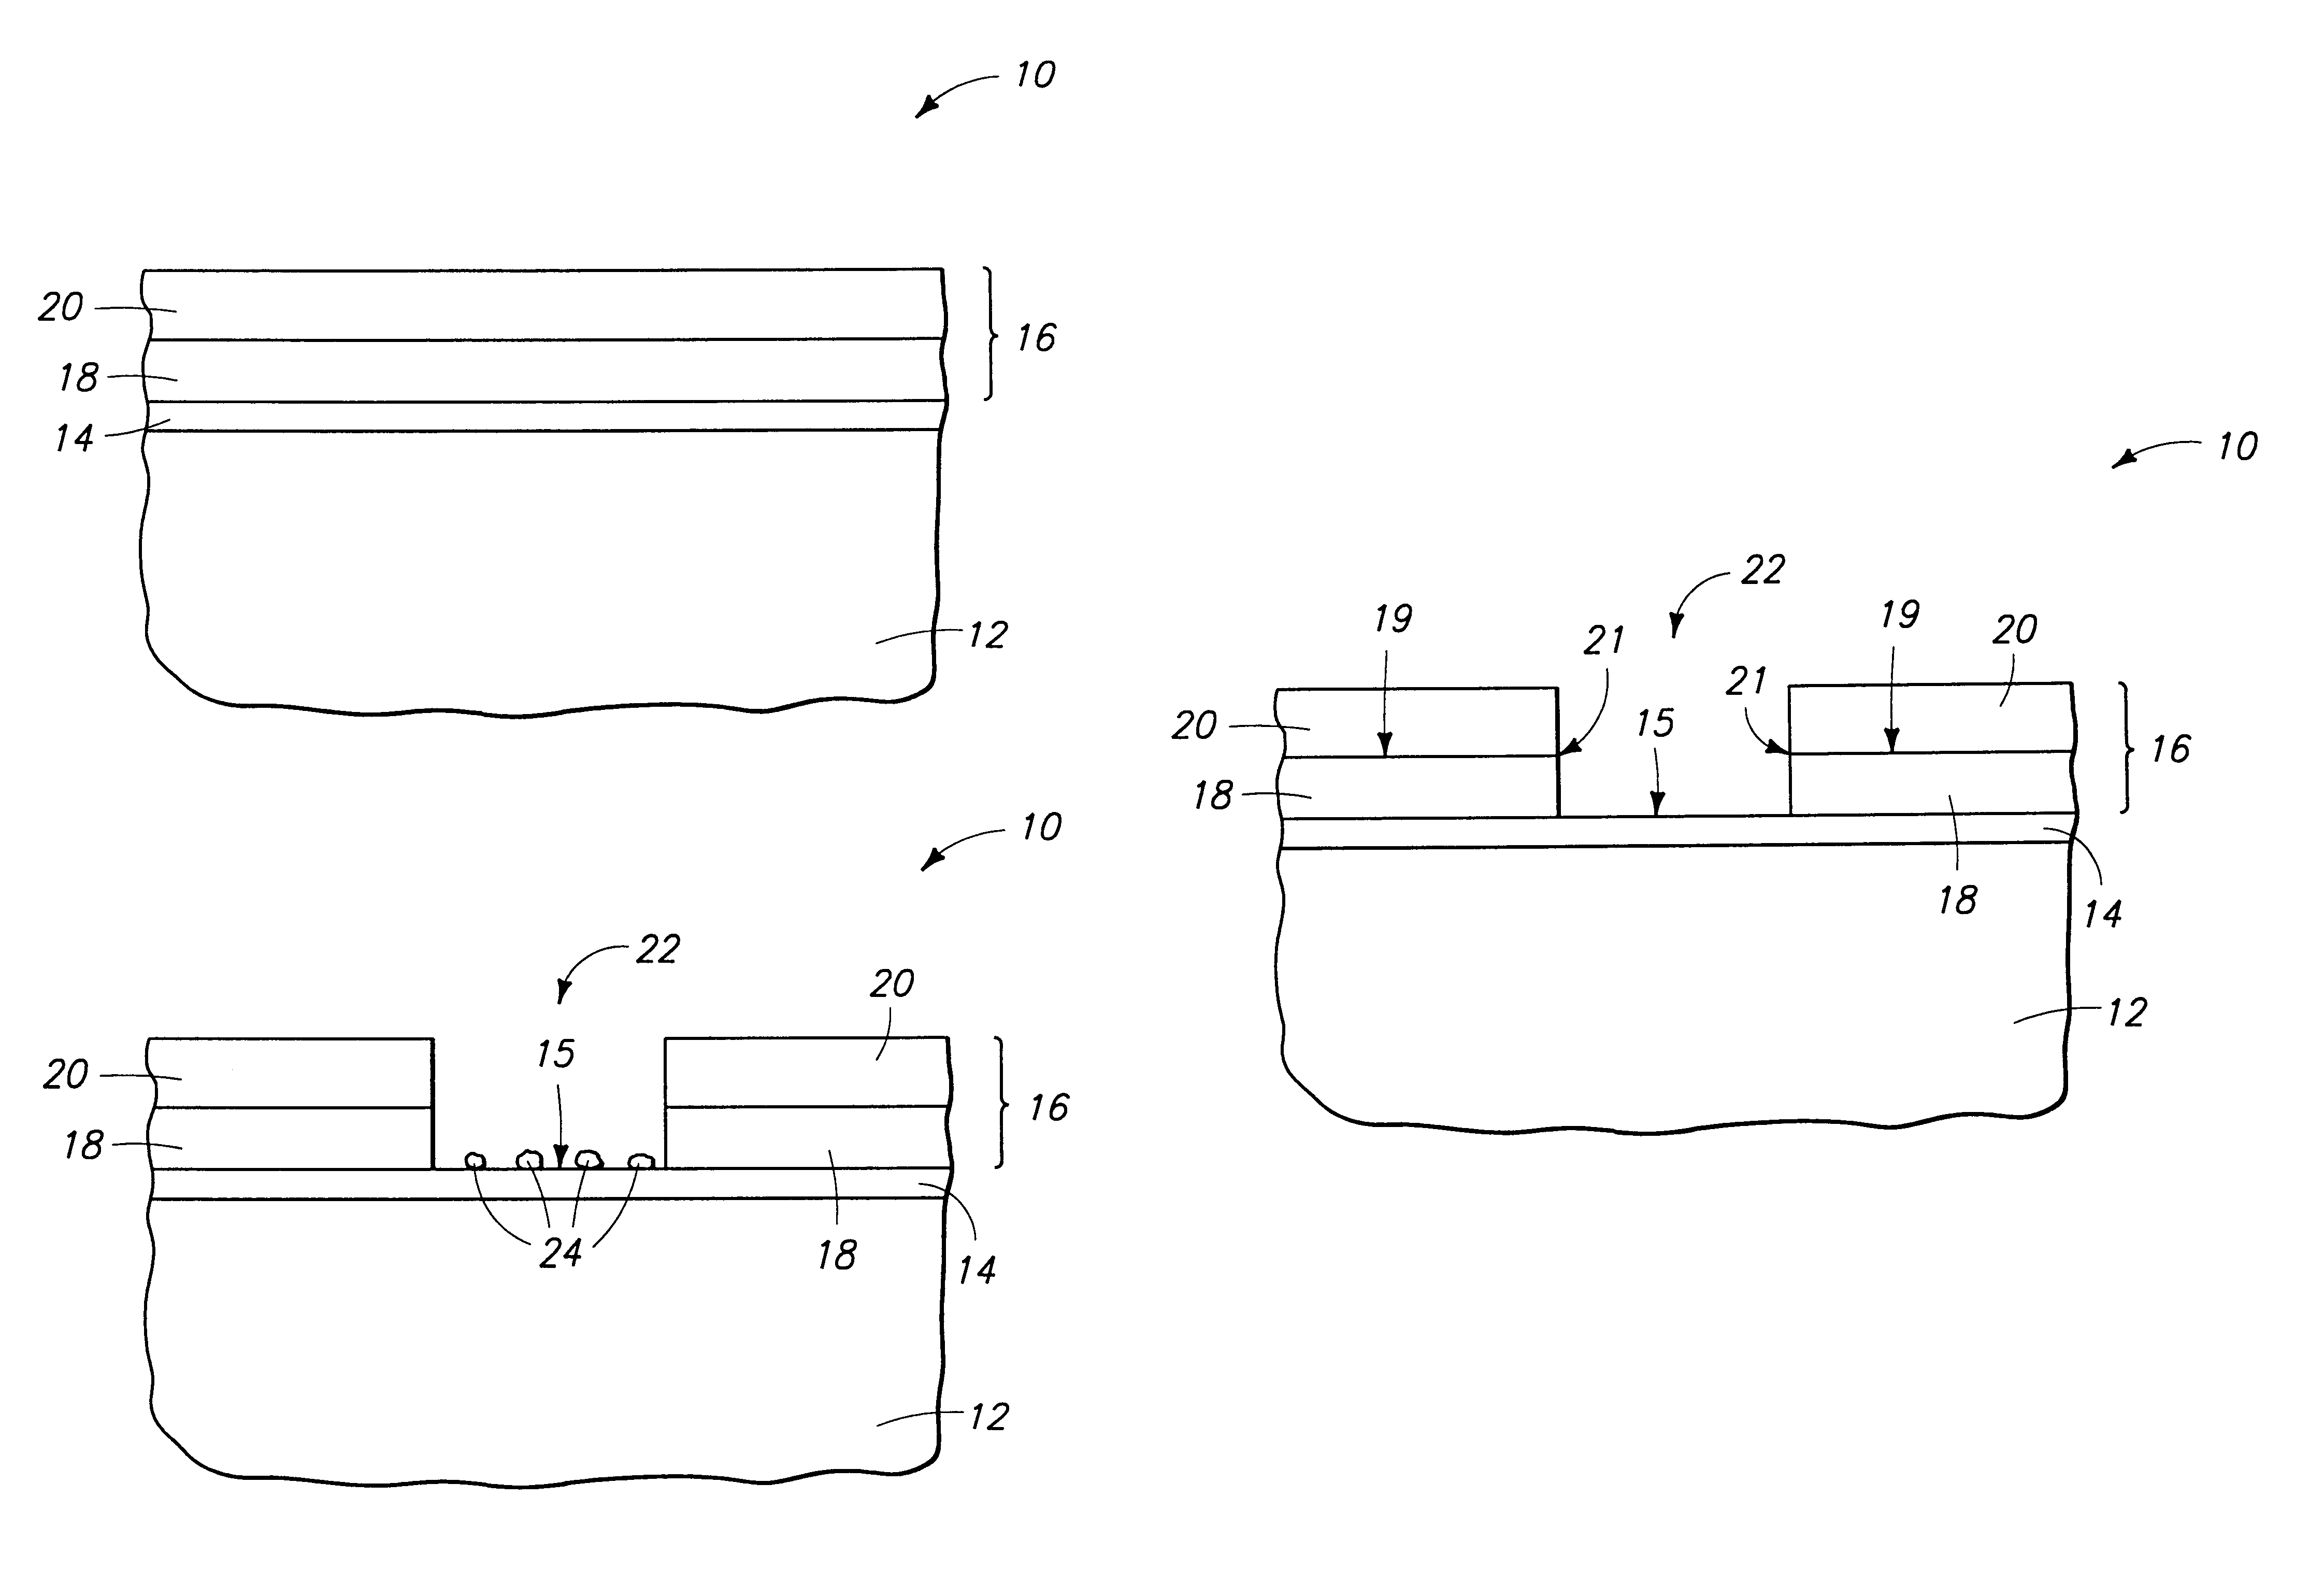 Methods of cleaning surfaces of copper-containing materials, and methods of forming openings to copper-containing substrates